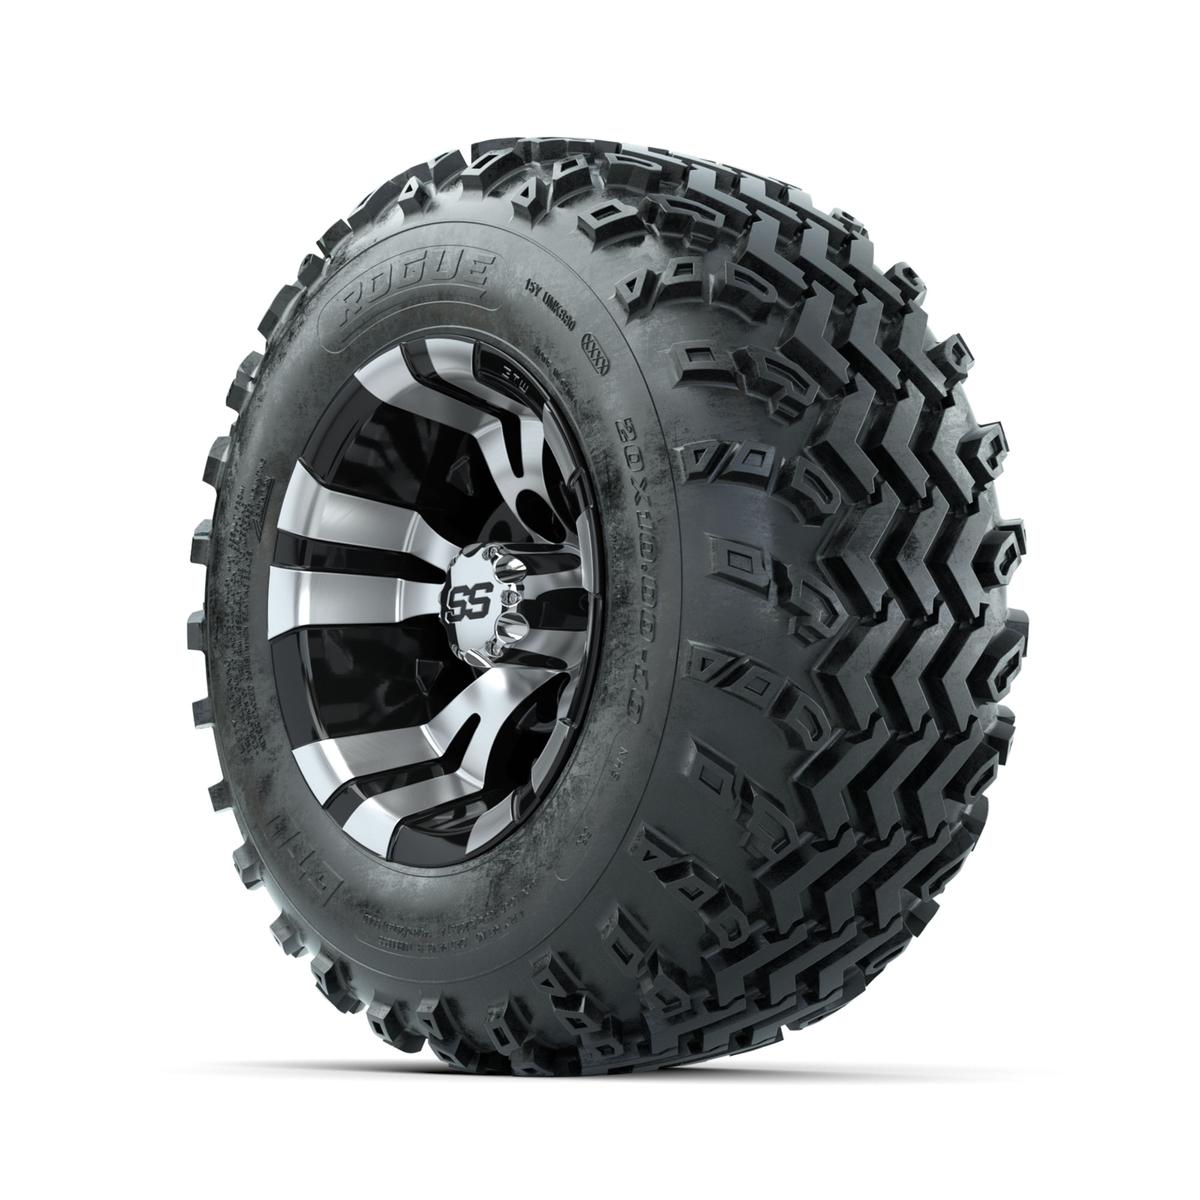 GTW Vampire Machined/Black 10 in Wheels with 20x10.00-10 Rogue All Terrain Tires – Full Set